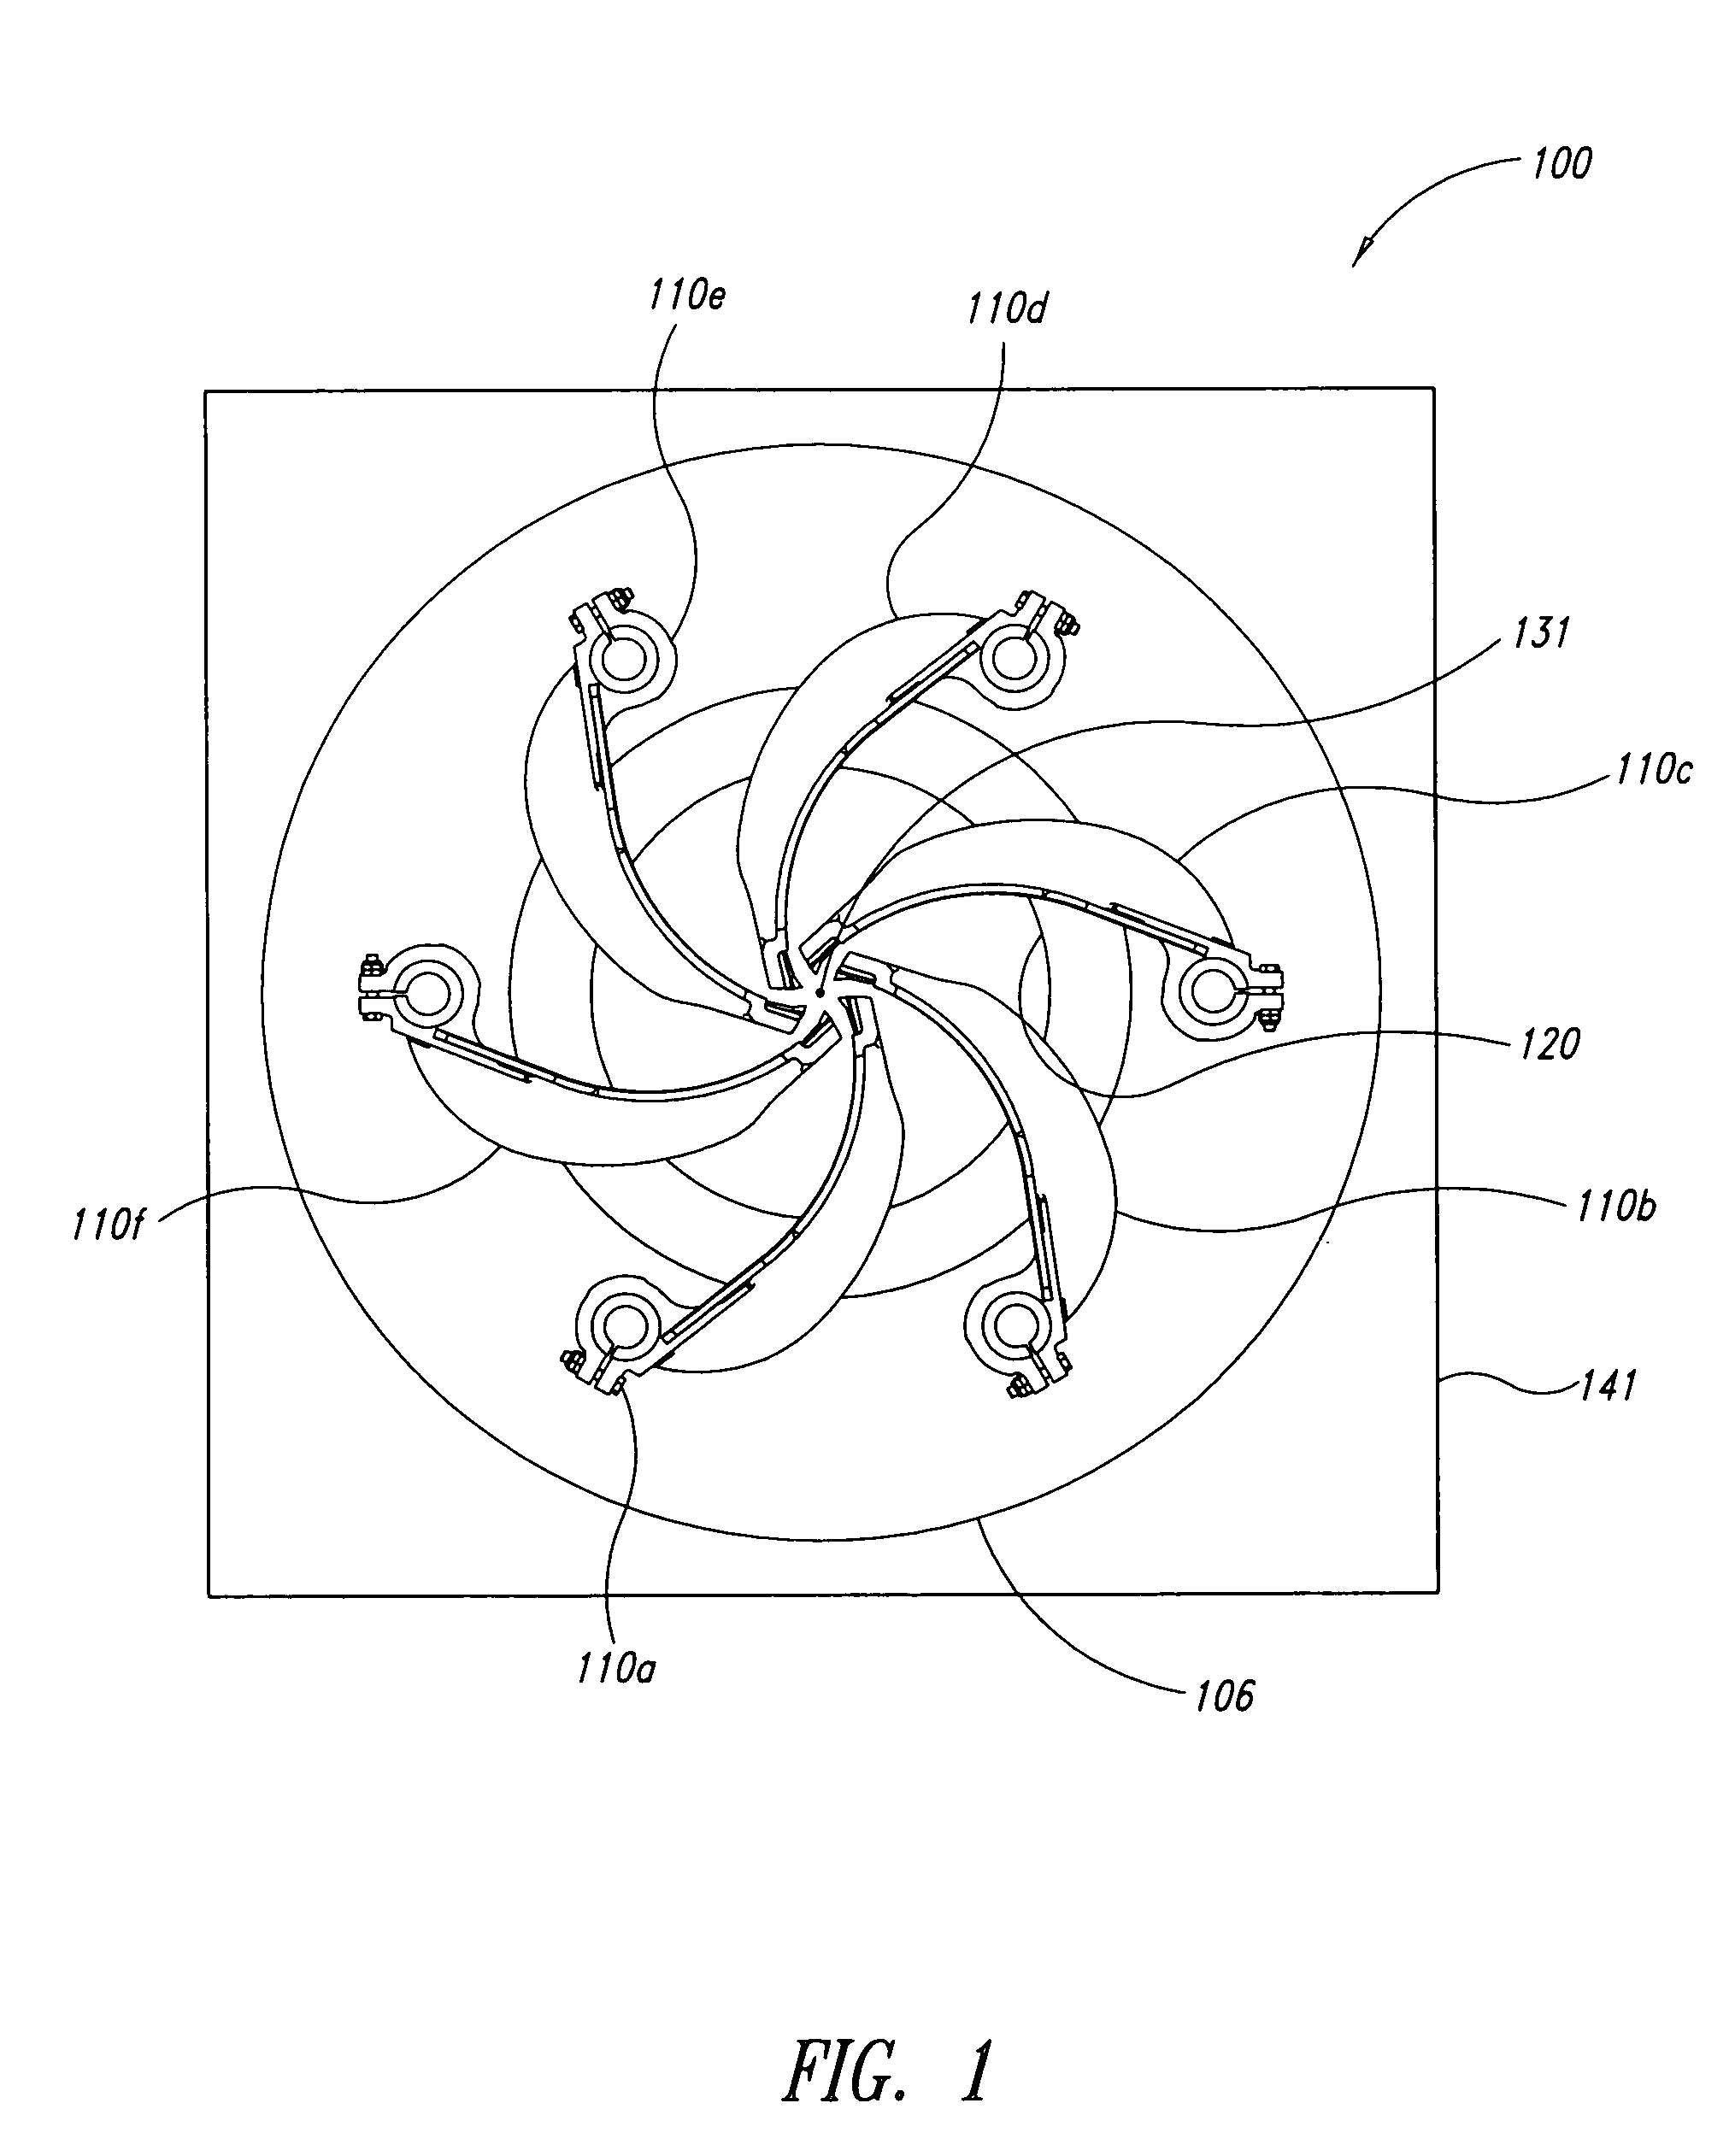 Swing arm assembly with replaceable insert for use with a debarker apparatus